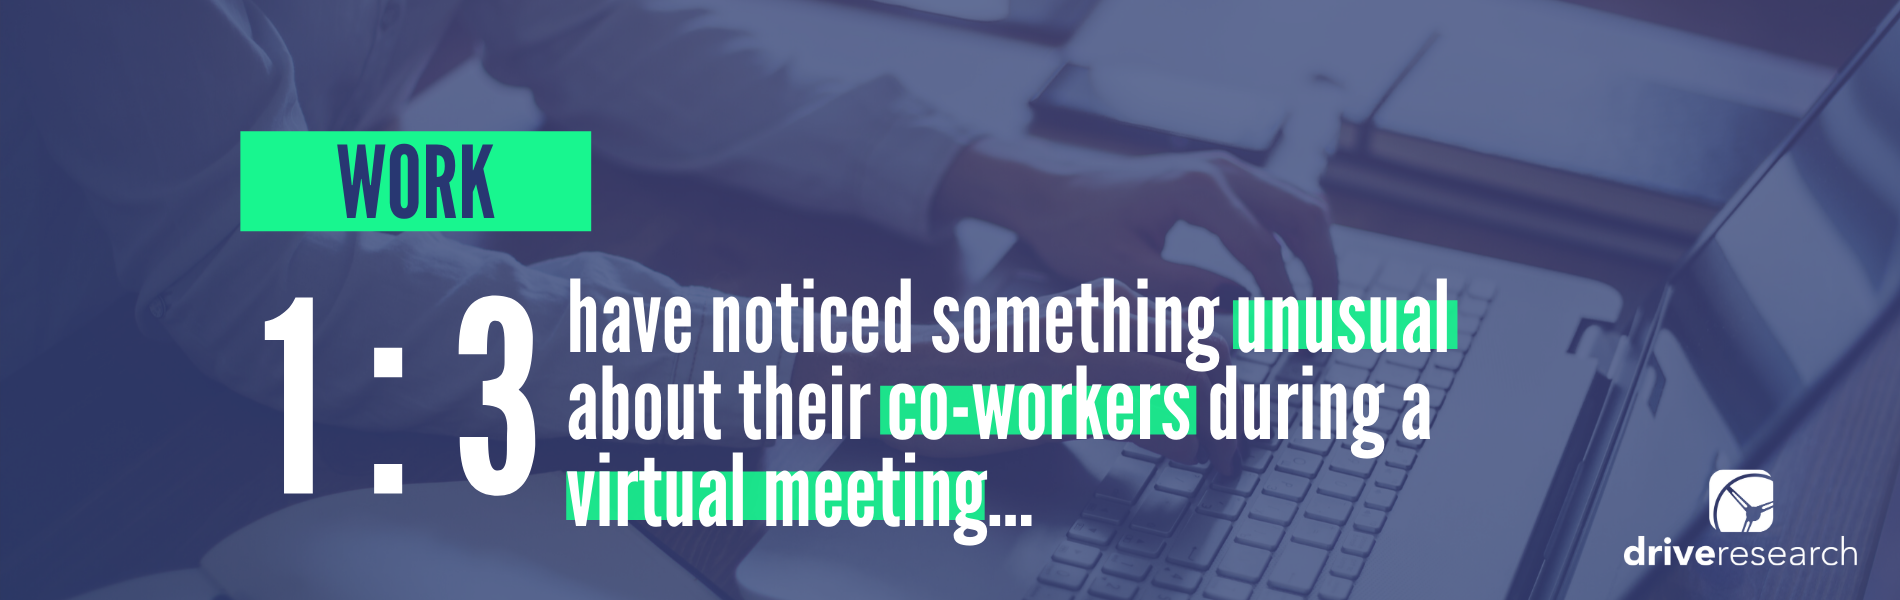 1 in 3 have noticed something unusual about their co-workers during a virtual meeting…